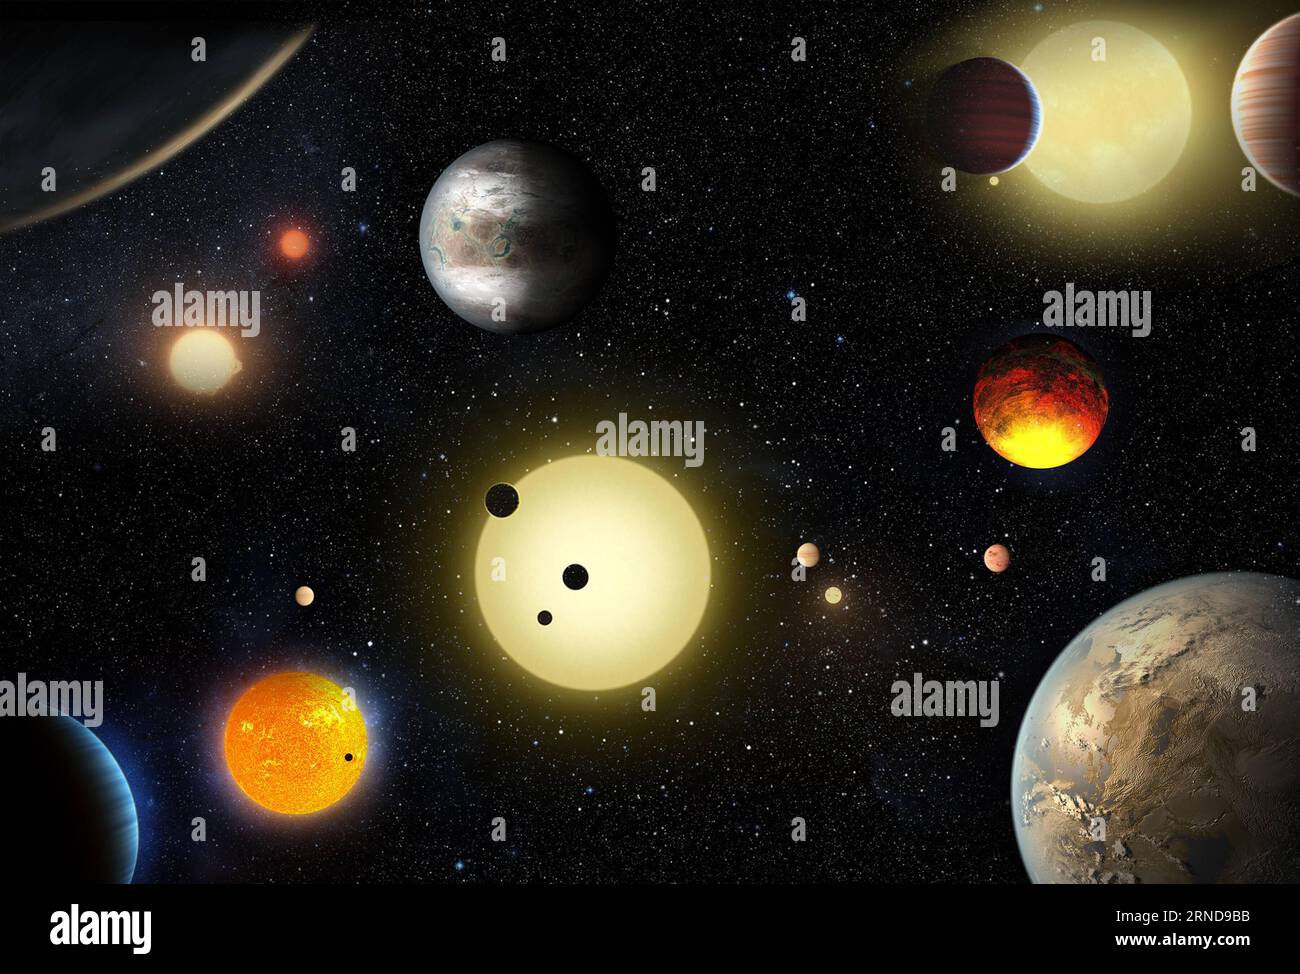 WASHINGTON D.C., May 11, 2016 -- This artist s concept obtained from U.S. space agency depicts select planetary discoveries made to date by s Kepler space telescope. said Tuesday its Kepler mission has verified the existence of nearly 1,300 new planets, almost doubling the number of known planets outside our solar system. /W. Stenzel)(lyi) U.S.-WASHINGTON D.C.--KEPLER-NEW PLANETS NASA PUBLICATIONxNOTxINxCHN   Washington D C May 11 2016 This Artist S Concept obtained from U S Space Agency depicts Select Planetary discoveries Made to Date by S Kepler Space Telescope Said Tuesday its Kepler Missi Stock Photo